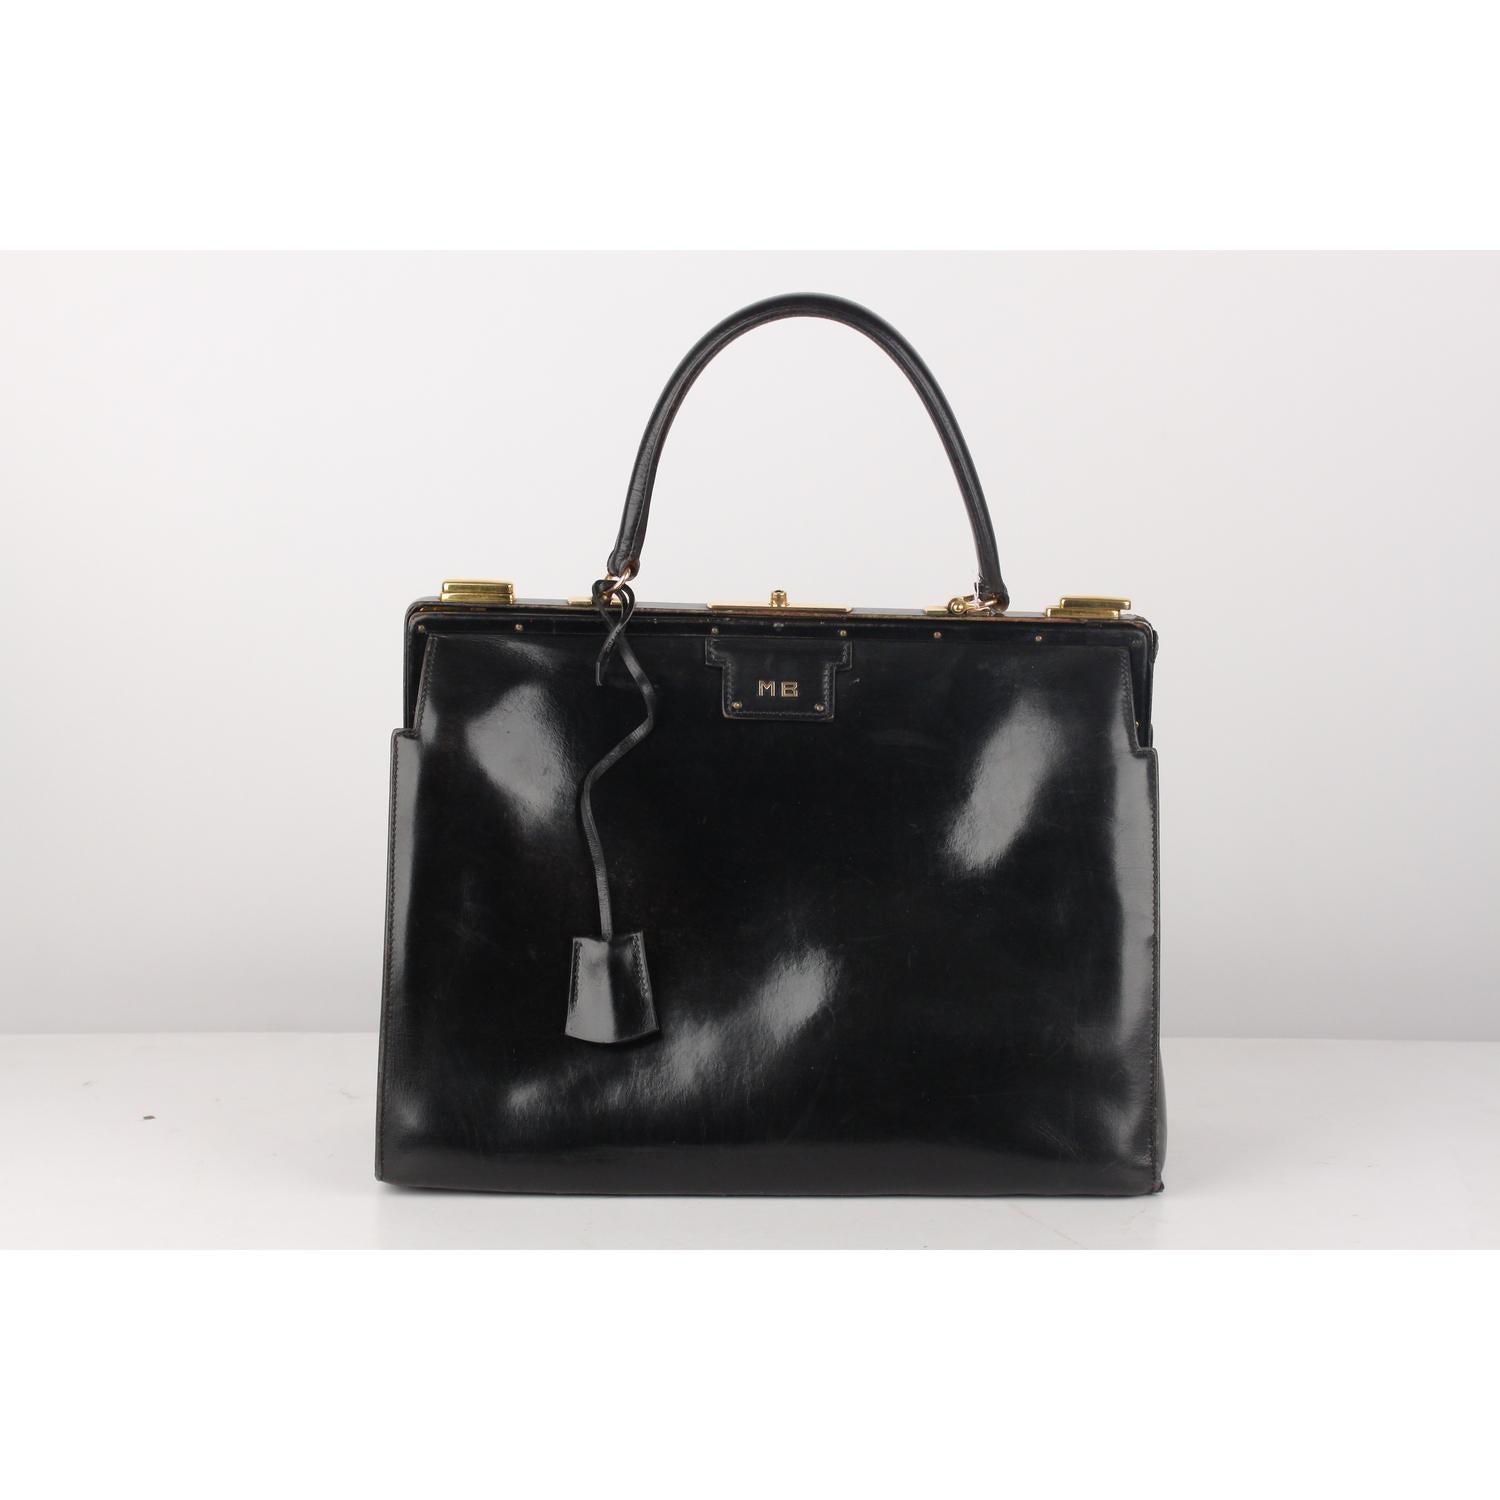 Rare vintage Hermes 'Sac 404' crafted in black leather with gold metal hardware. Front MB letters on the front (they are probably the initials of the old owner).  Structured bag with with top push closure and side lock clasps. Key with leather